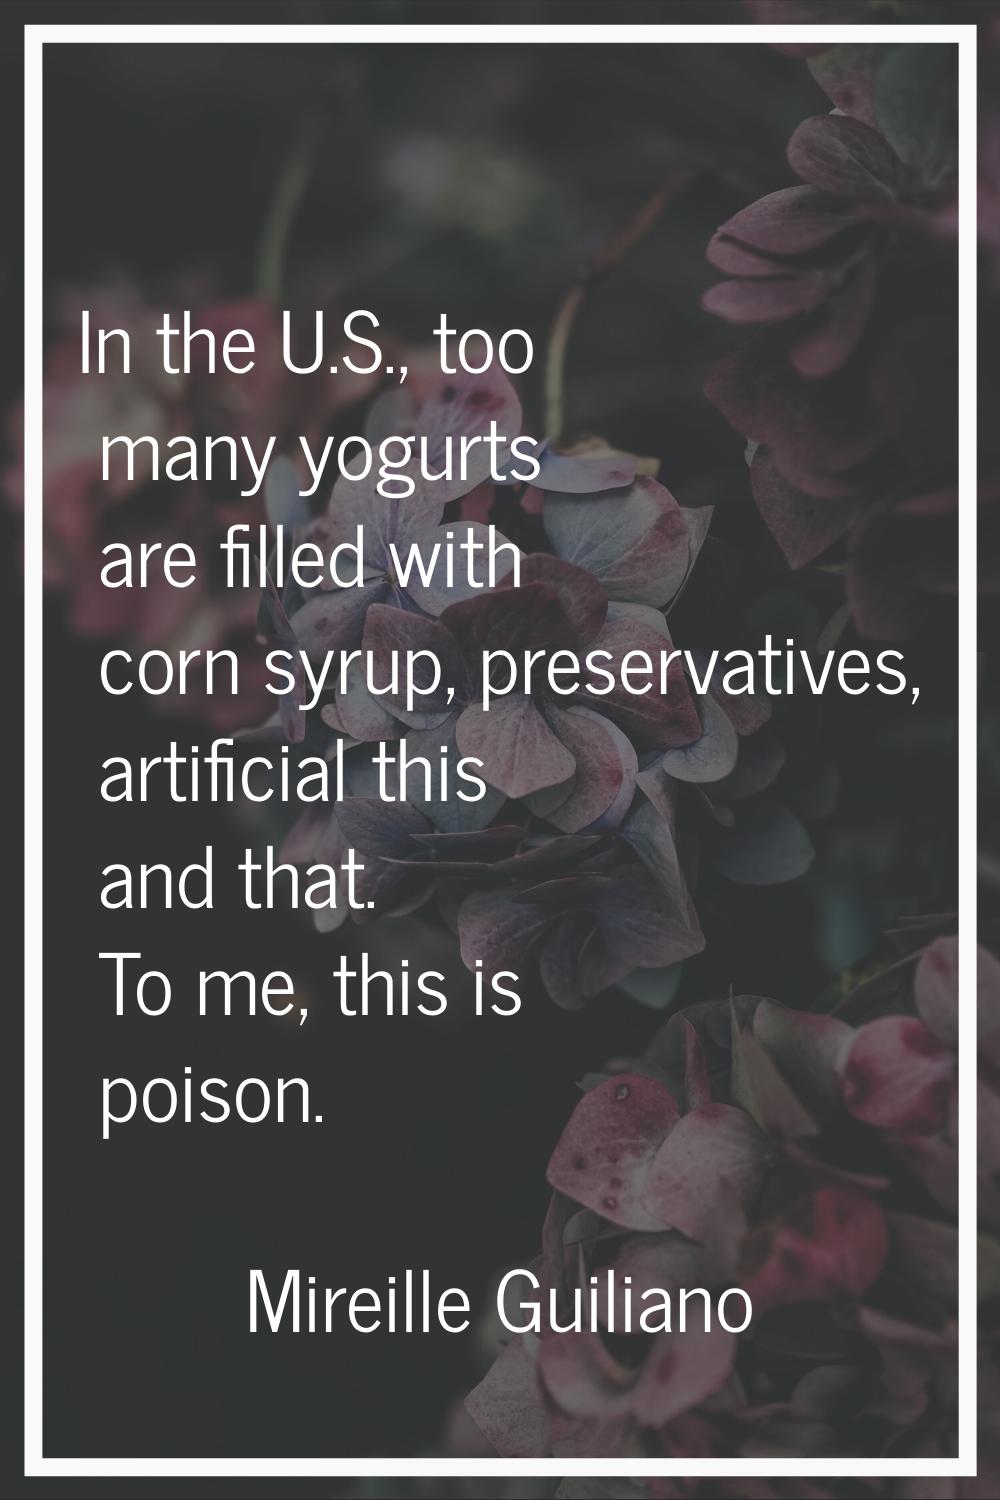 In the U.S., too many yogurts are filled with corn syrup, preservatives, artificial this and that. 